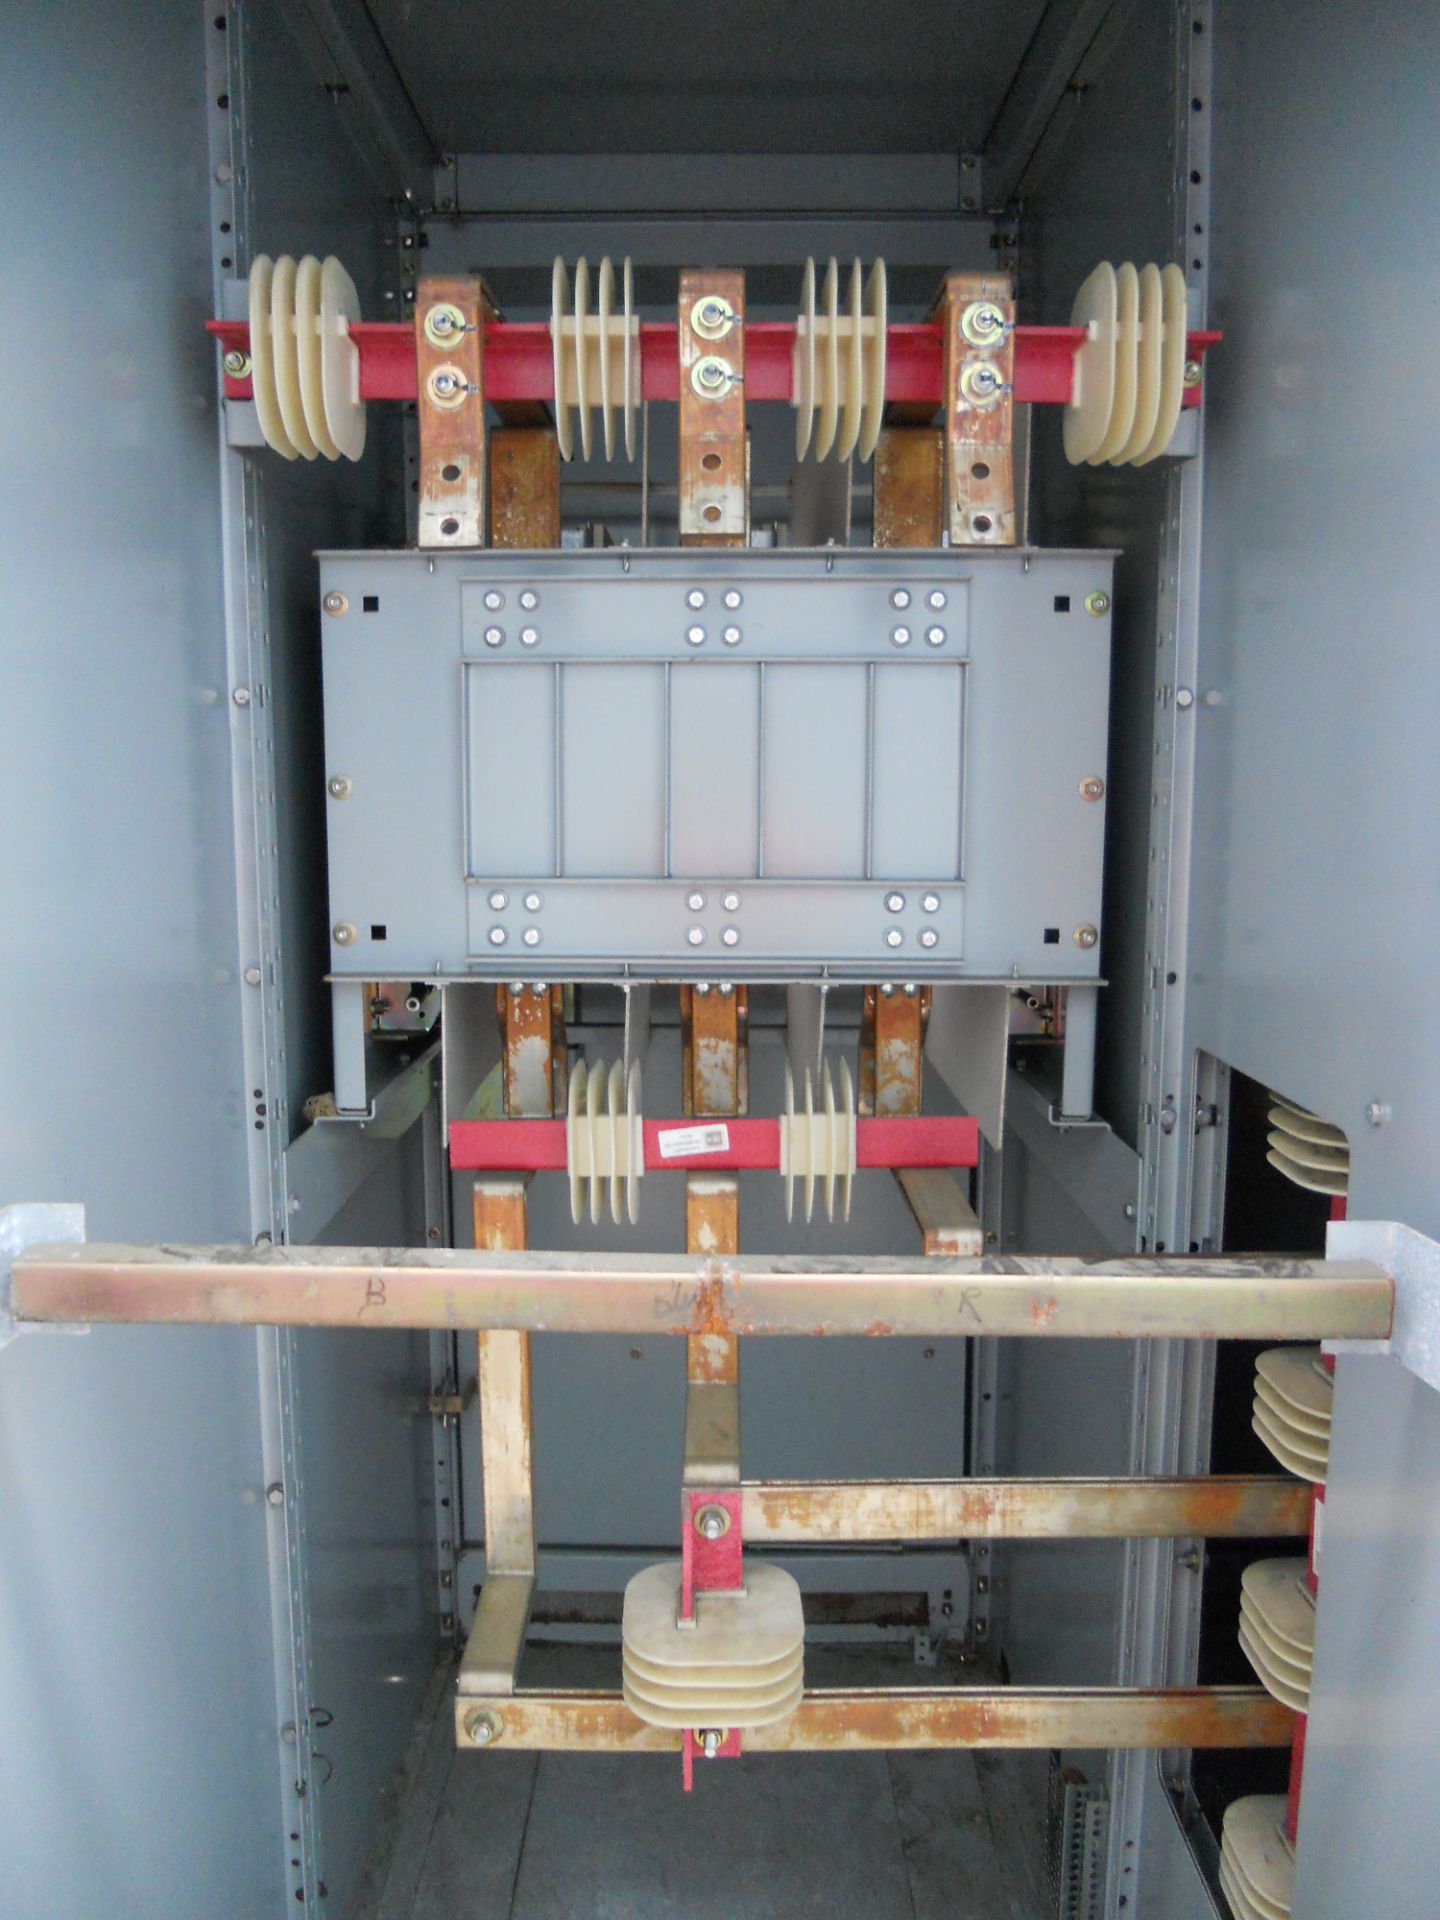 C-H MVS load interrupter Switch 5,000 volts - Image 4 of 4